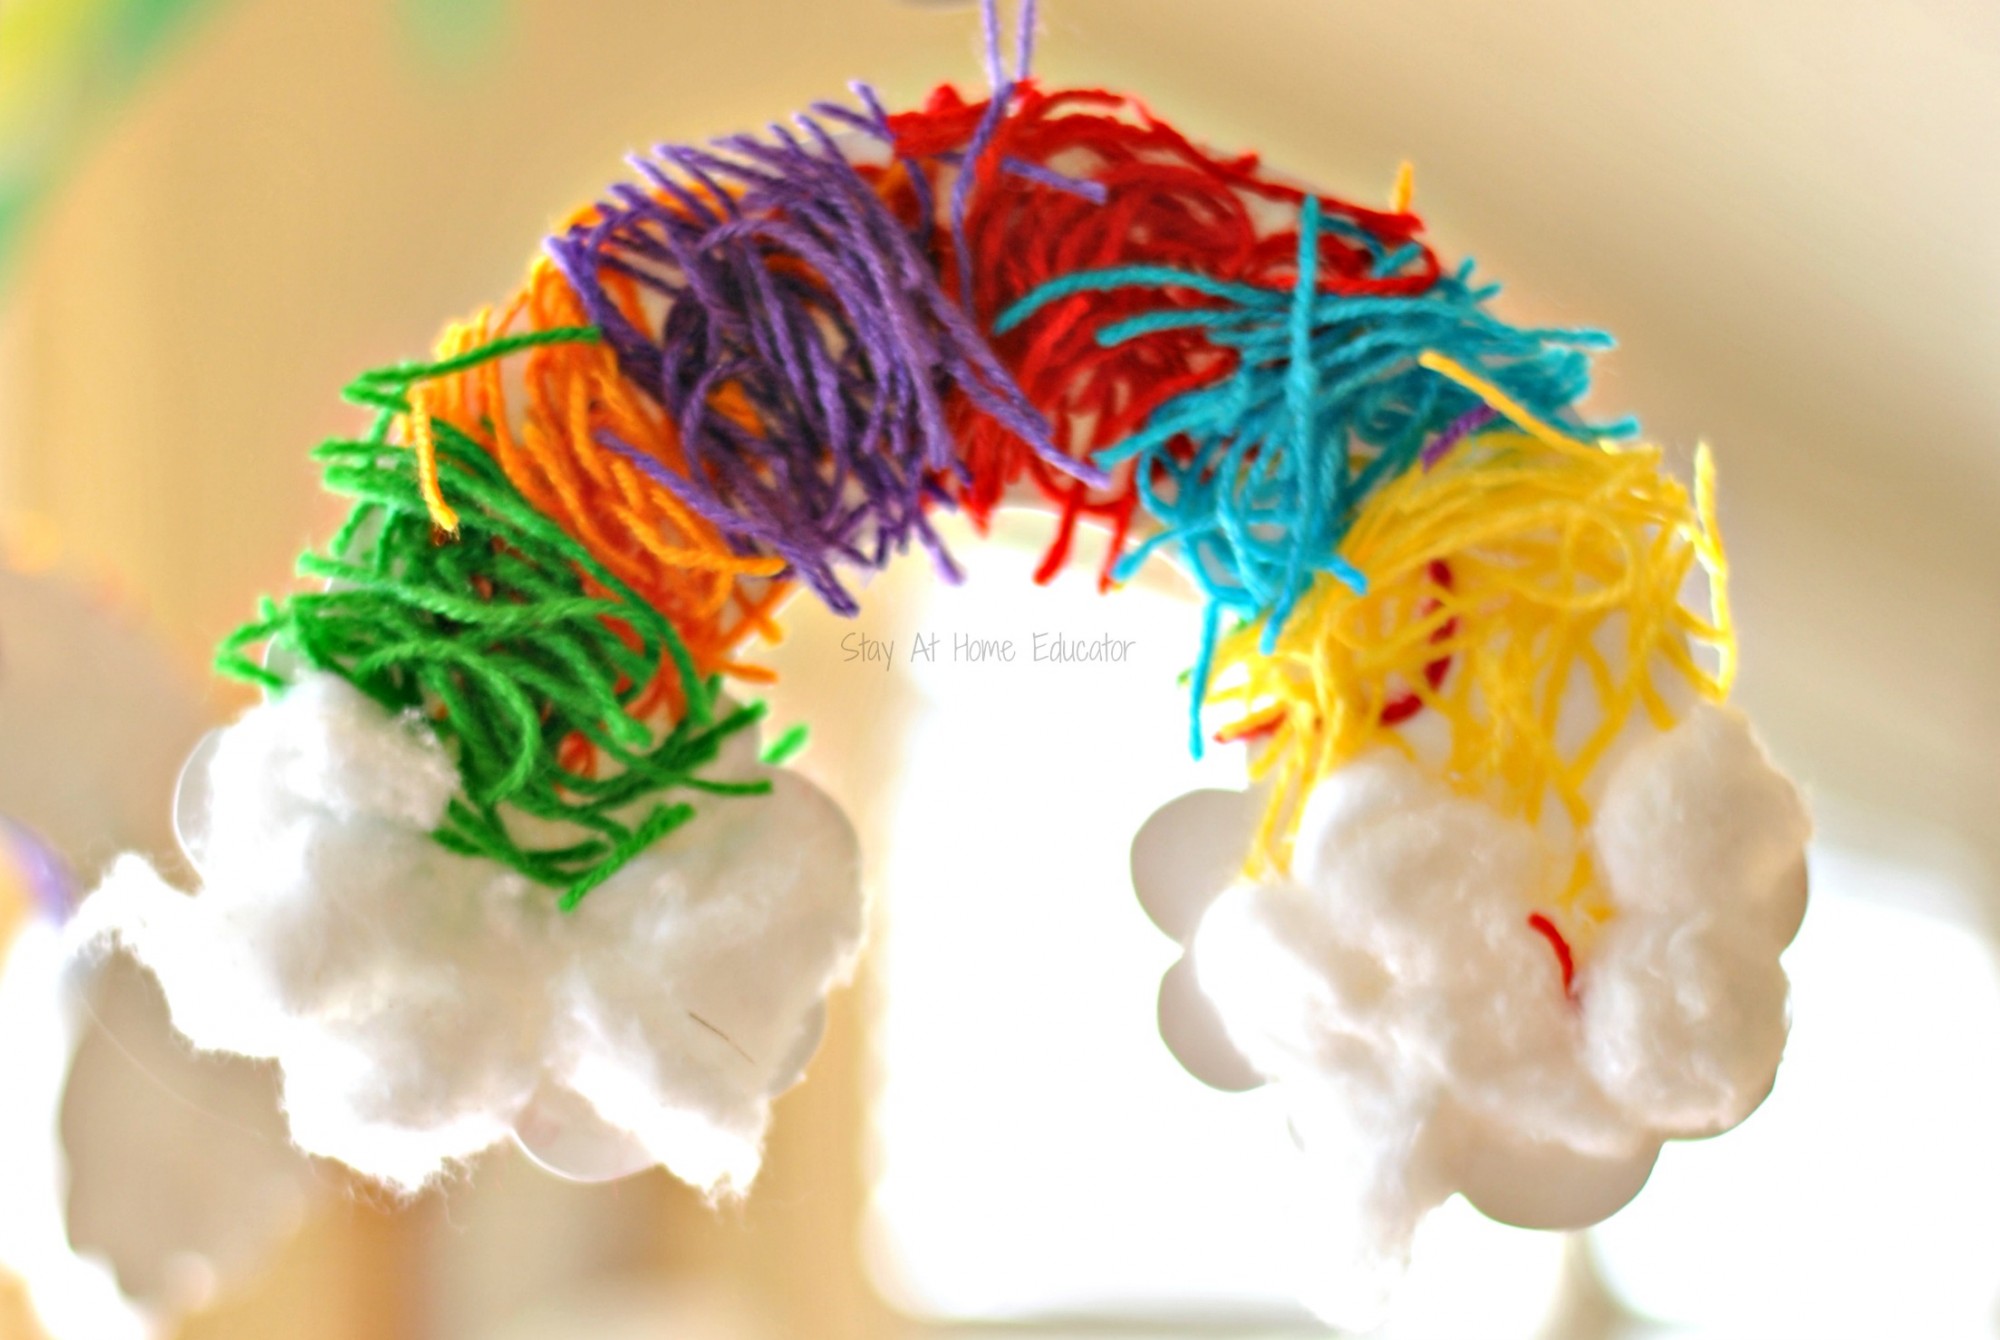 Rainbow craft of snipped yarn for fine motor skills - Snipped yarn rainbows, a fine motor craft for preschoolers  - work on hand strength, fine motor skills, and scissor cutting practice while doing a rainbow craft for preschoolers. Add it to your st. Patrick's Day lesson plans